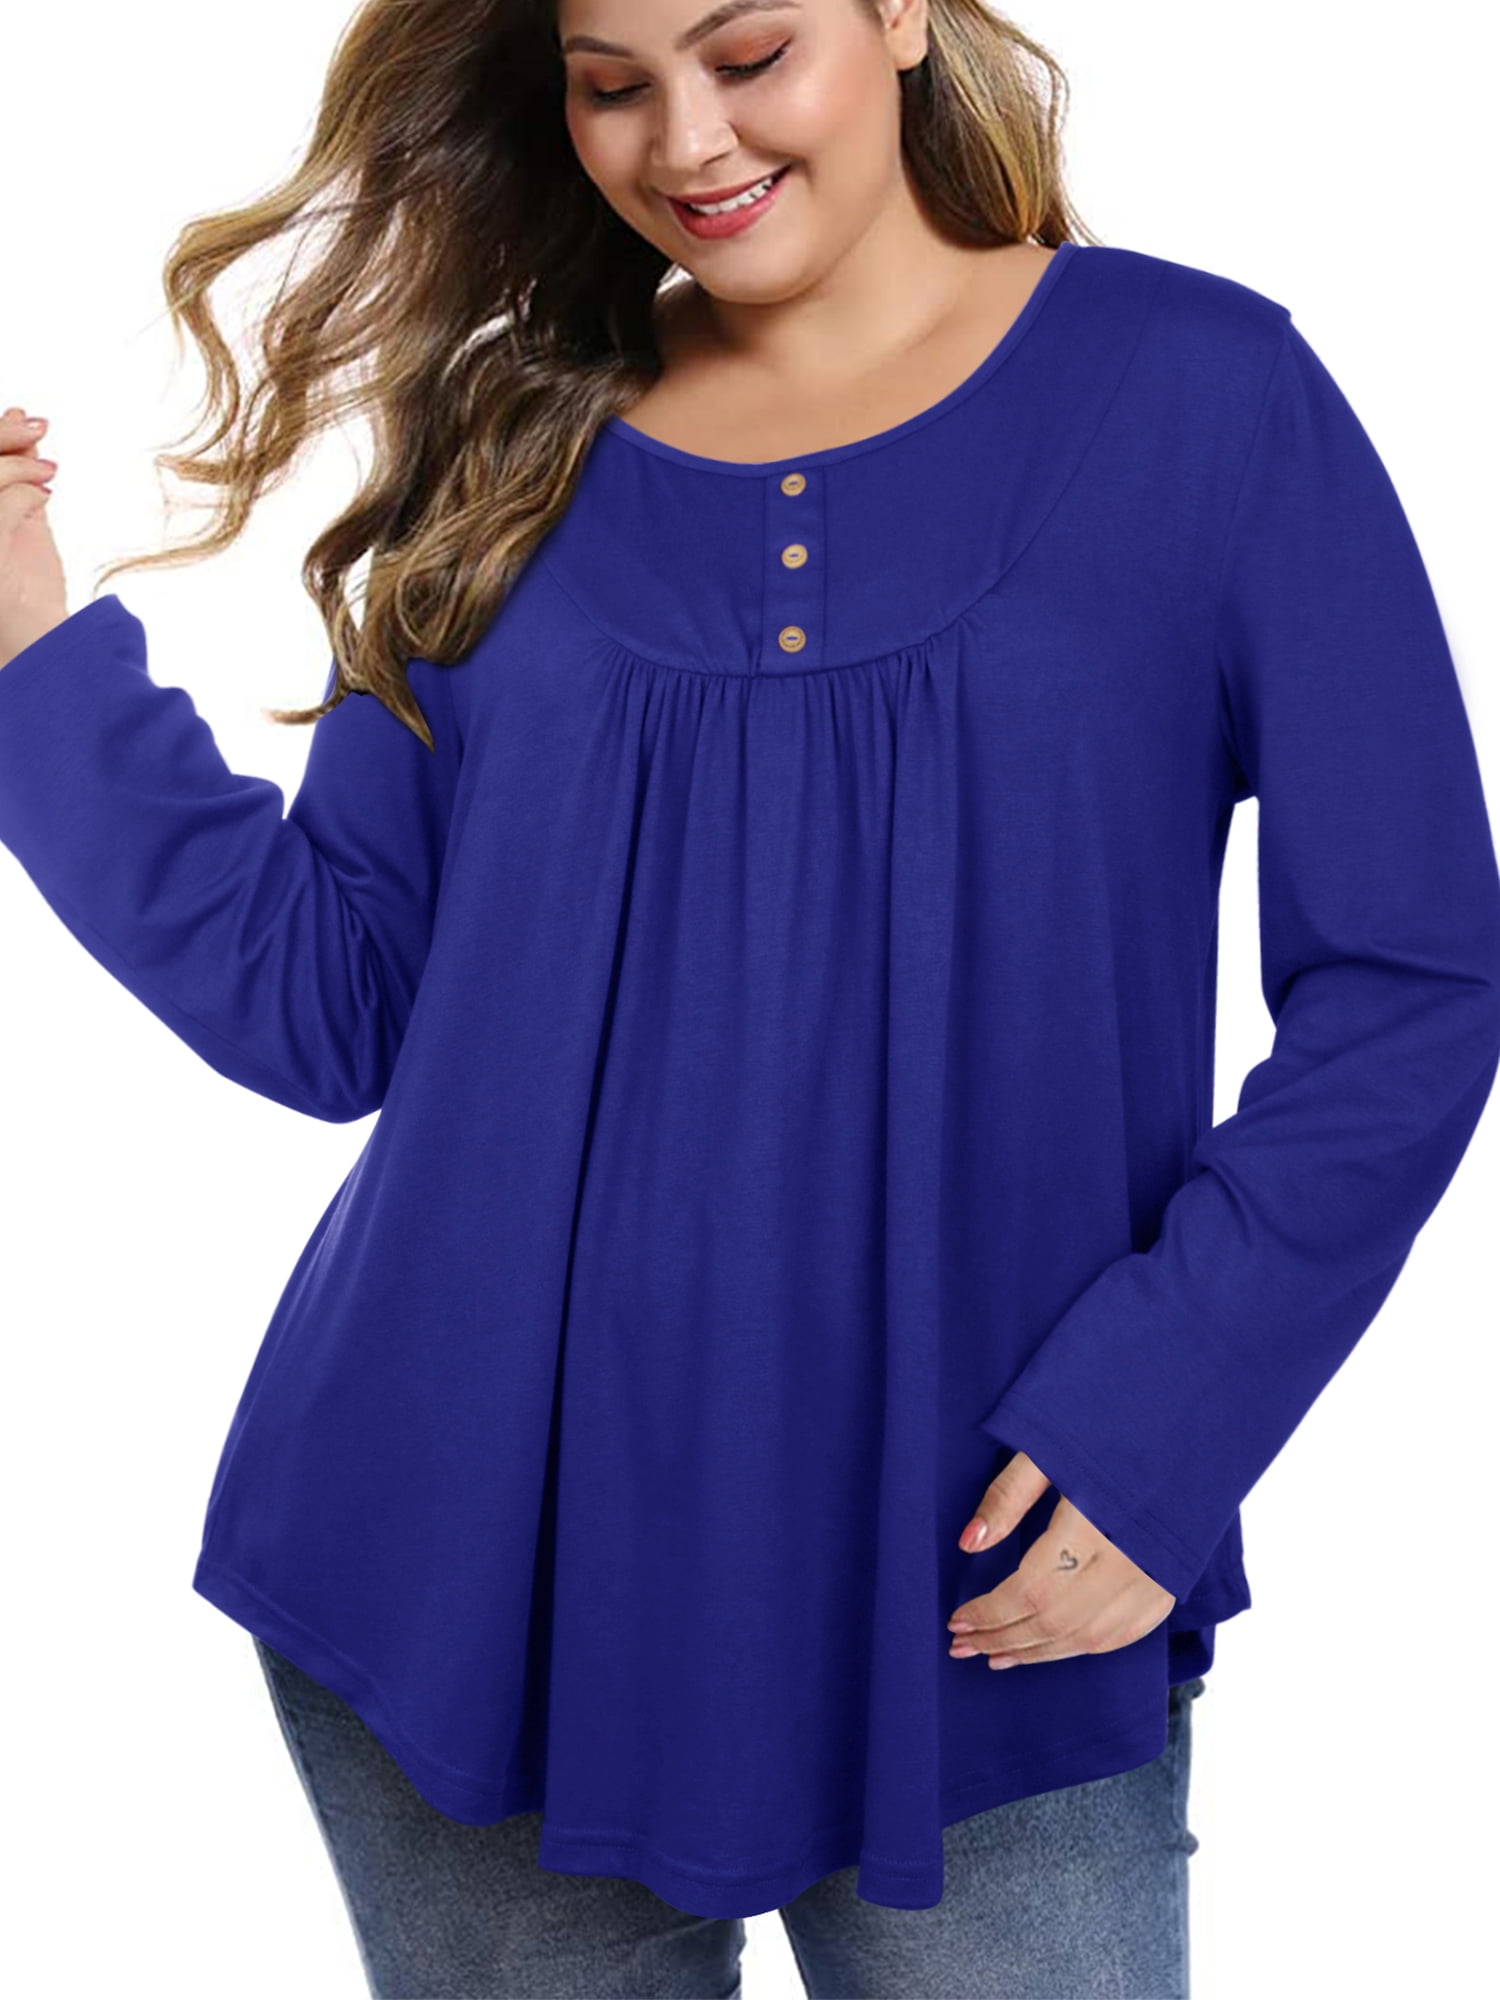 Chama Long Sleeve Pullover Swing Tunic Silhouette Blouse (Women's Plus ...